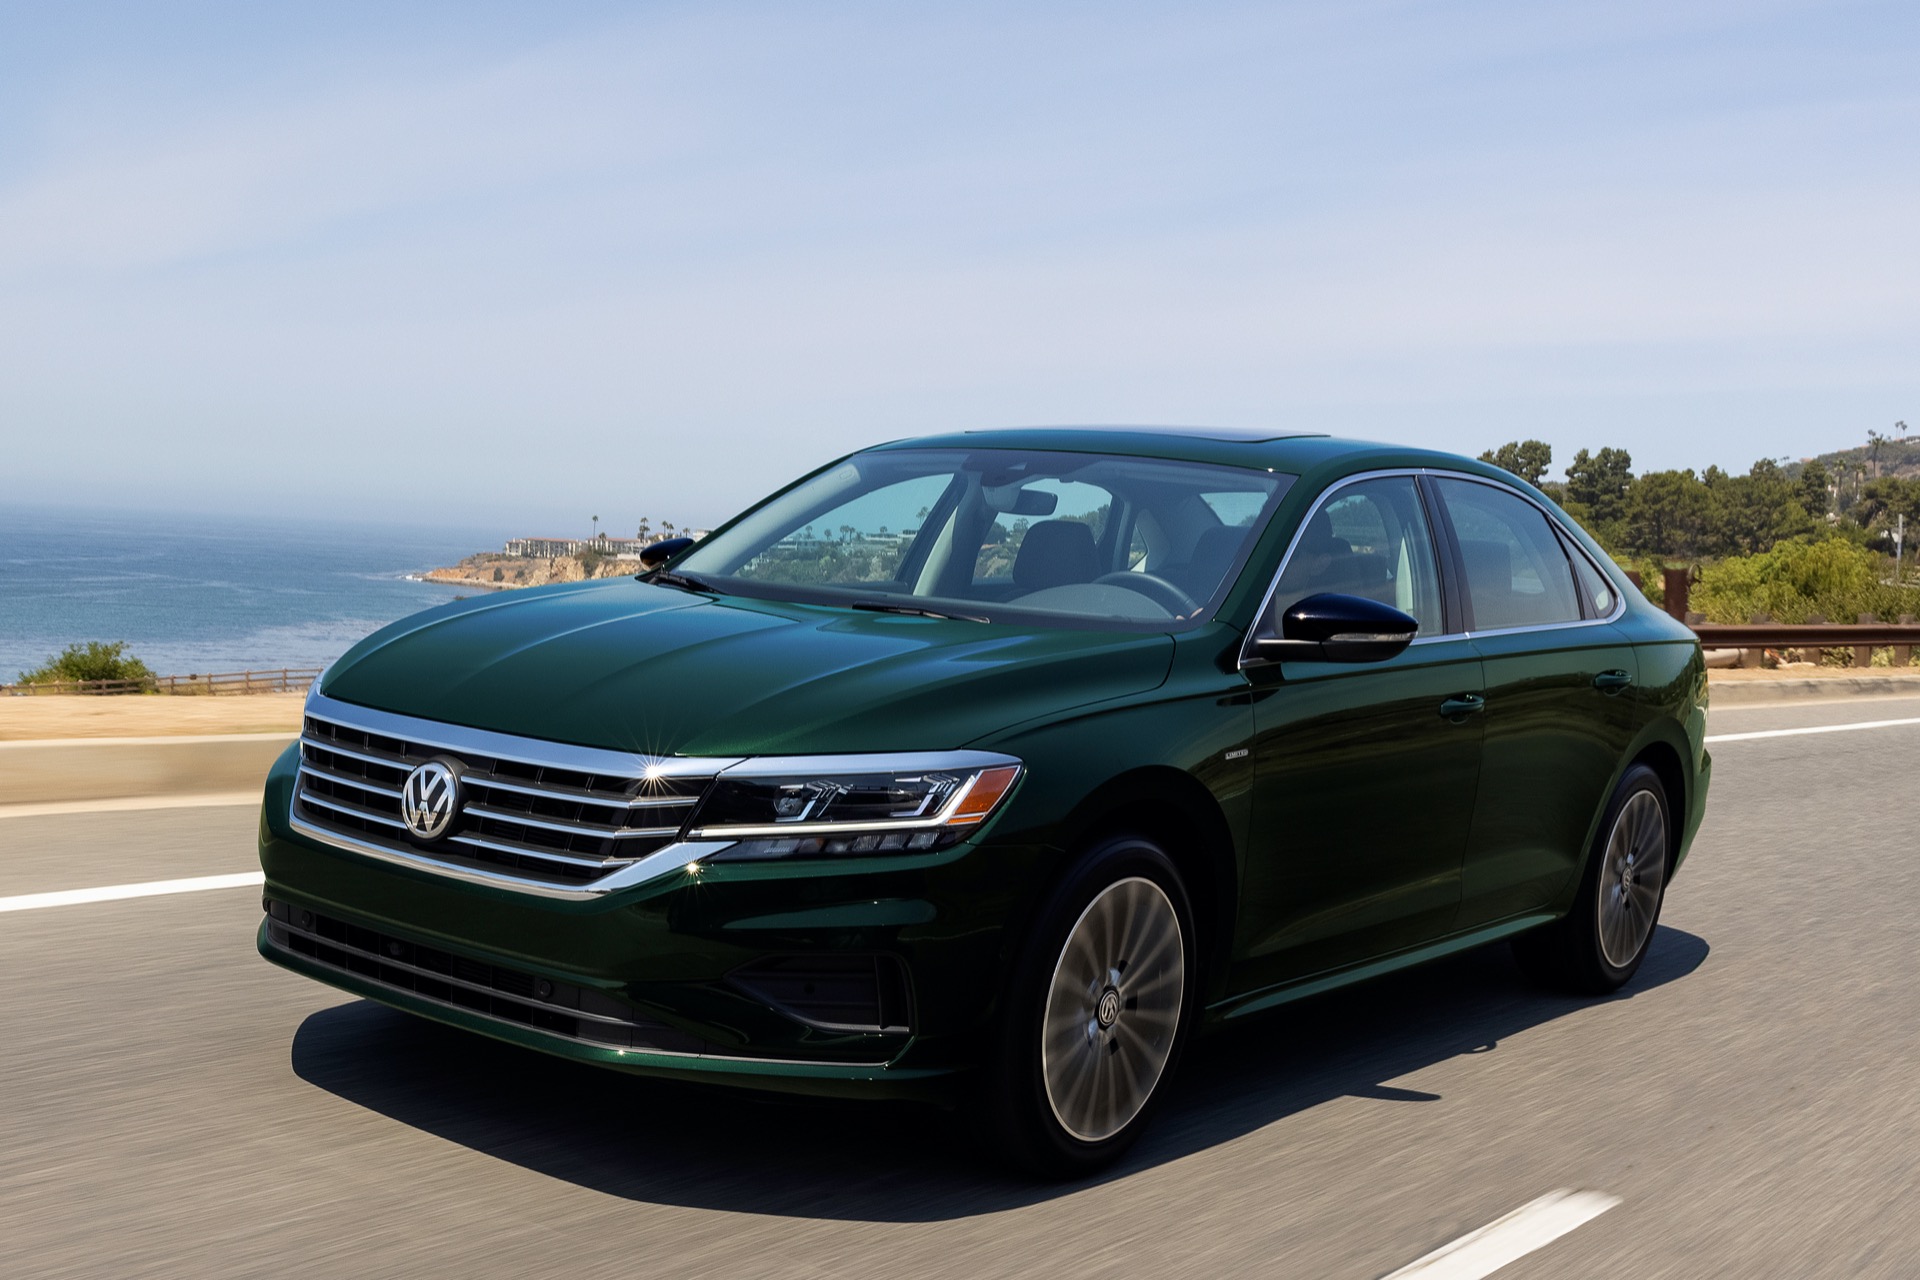 Volkswagen Passat Review Prices Specs And Photos The Car